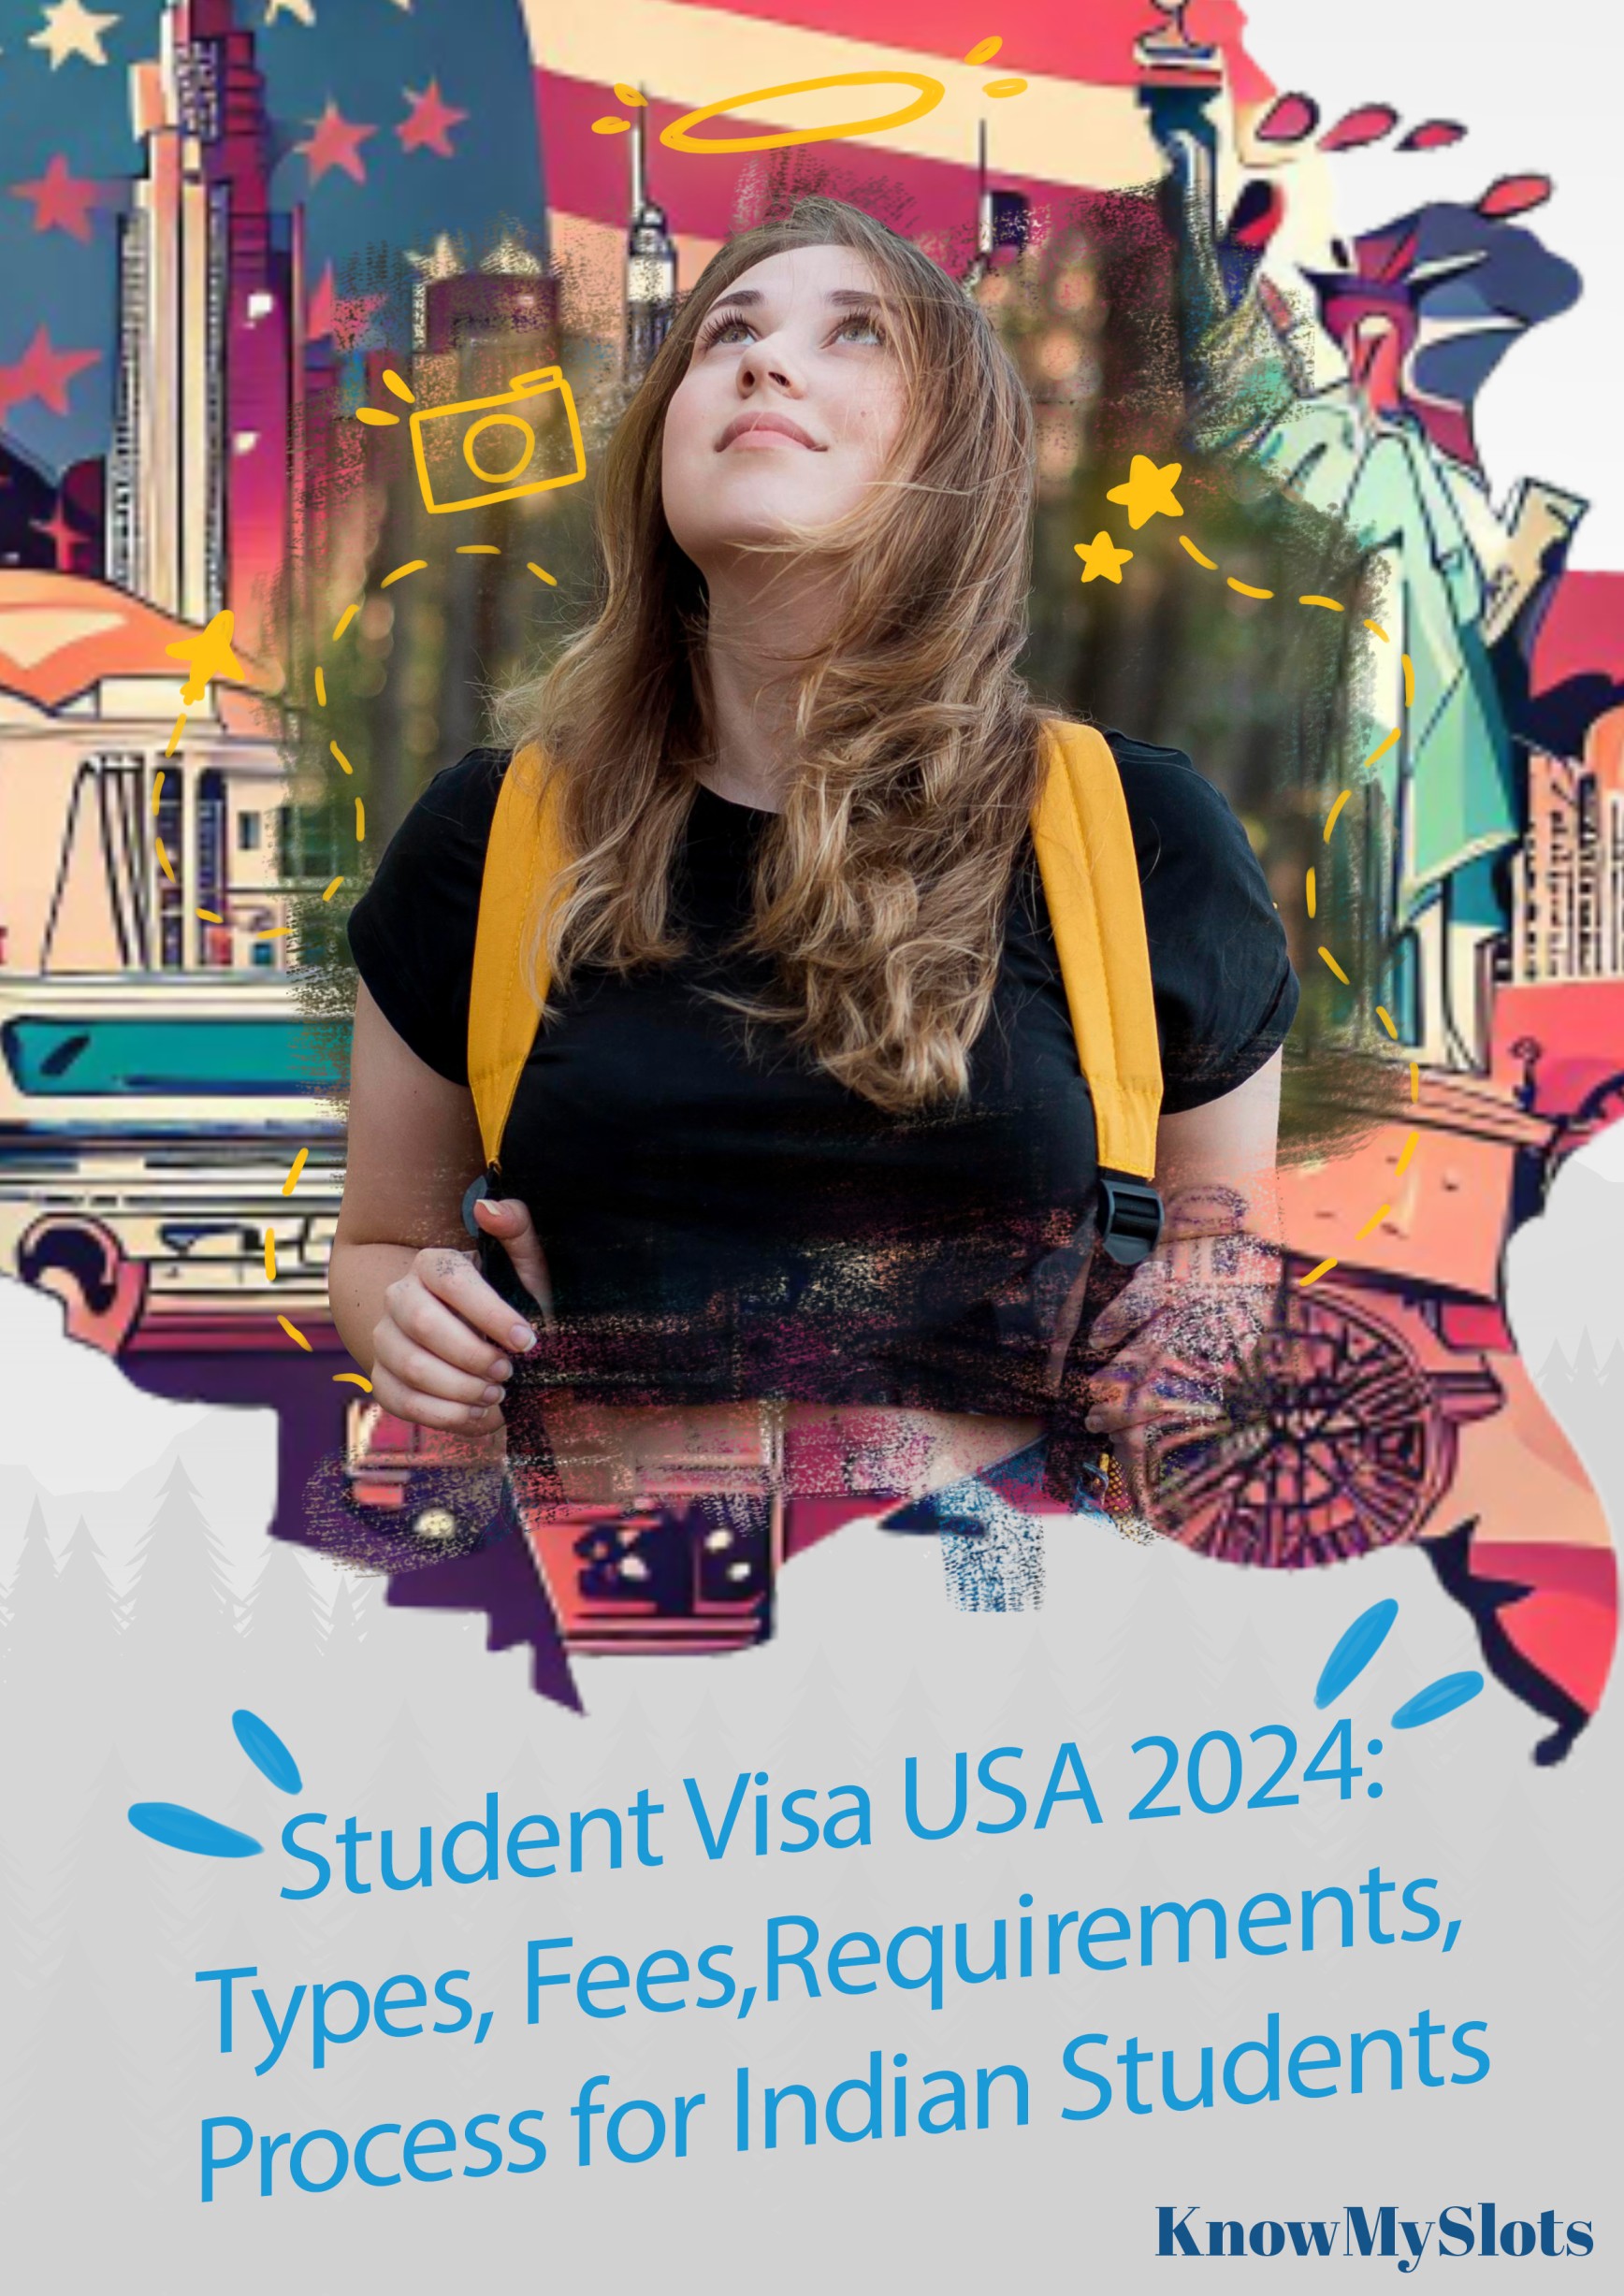 Student Visa USA 2024: Types, Fees, Requirements, Process for Indian Students